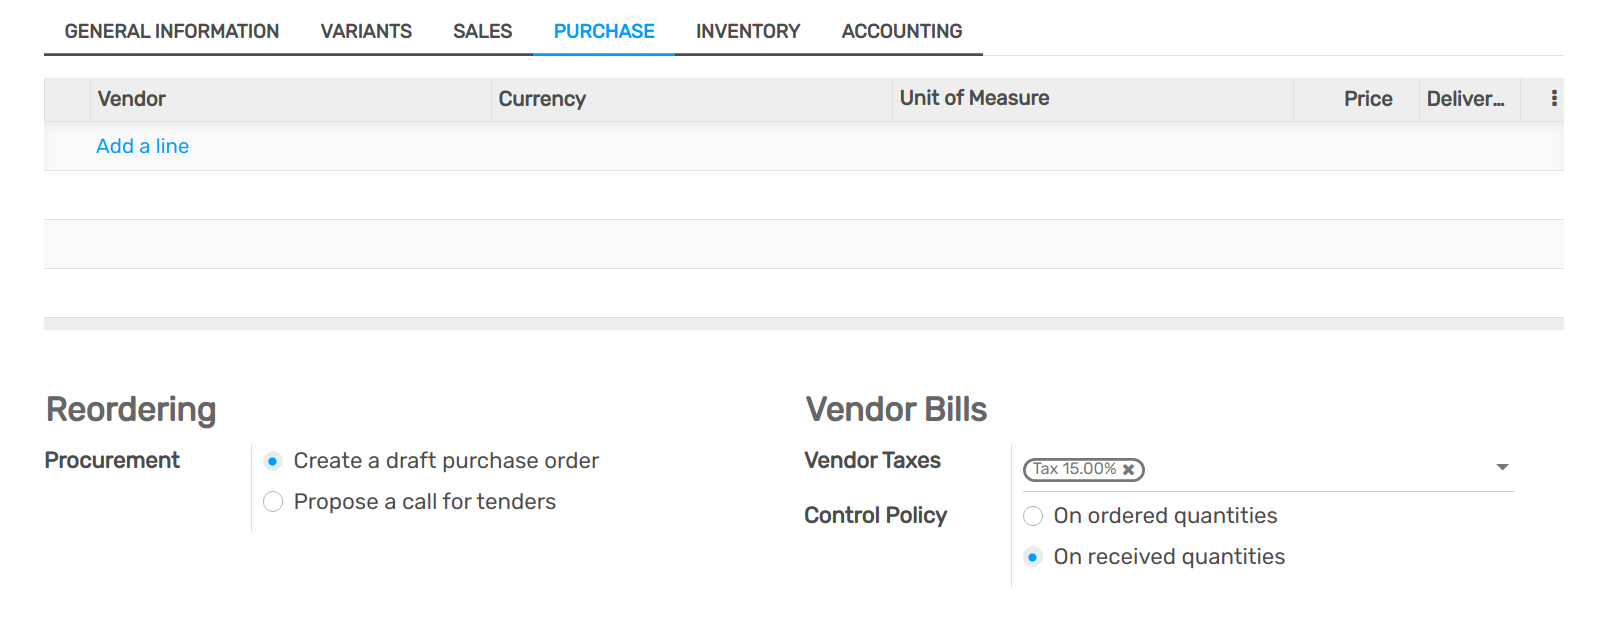 Vendor bills default control setting for new products in Flectra Purchase